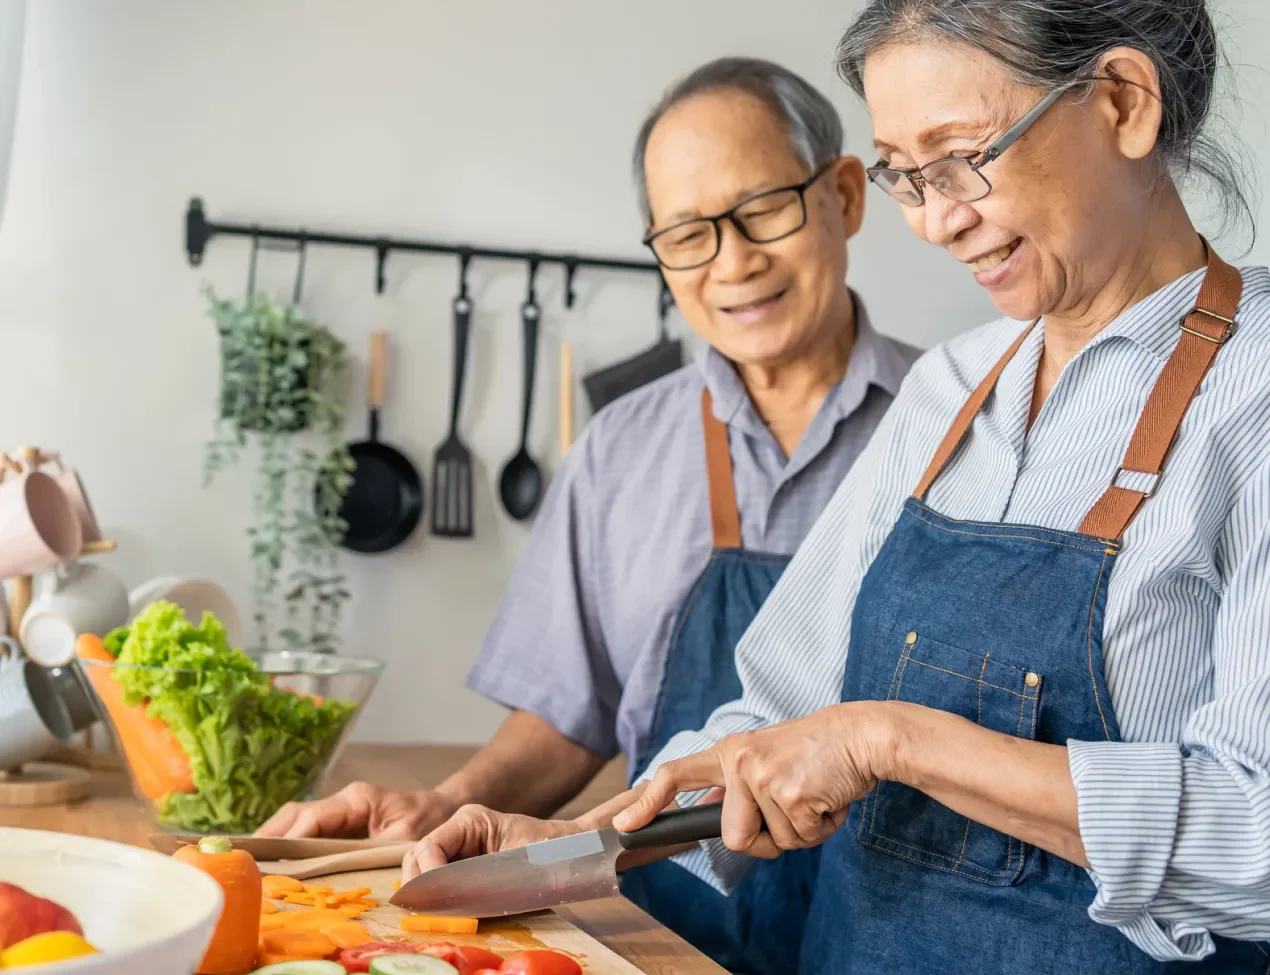 Is there a healthiest diet for seniors?